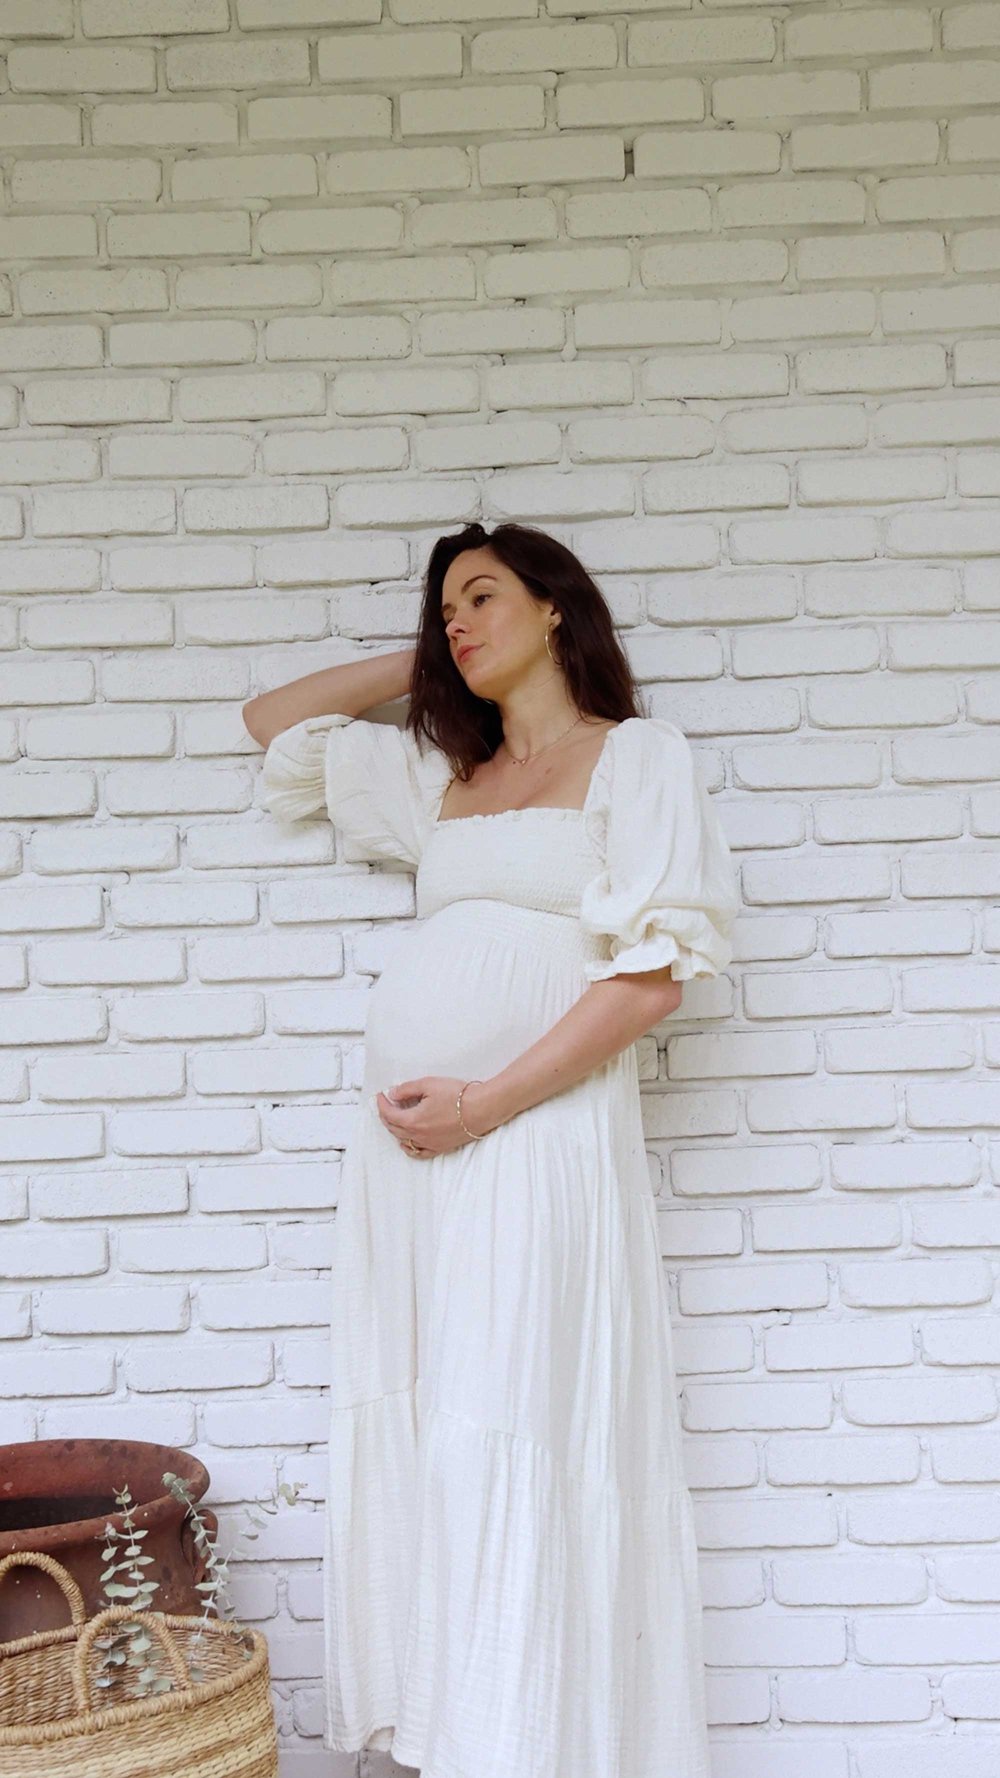 Cute cottage style summer maternity dress. @sarahchristine wearing Nothing Fits But Kiko Dress Soft muslin dress with puffed sleeves, smocked chest and sleeves in Seattle, Washington -1.jpg